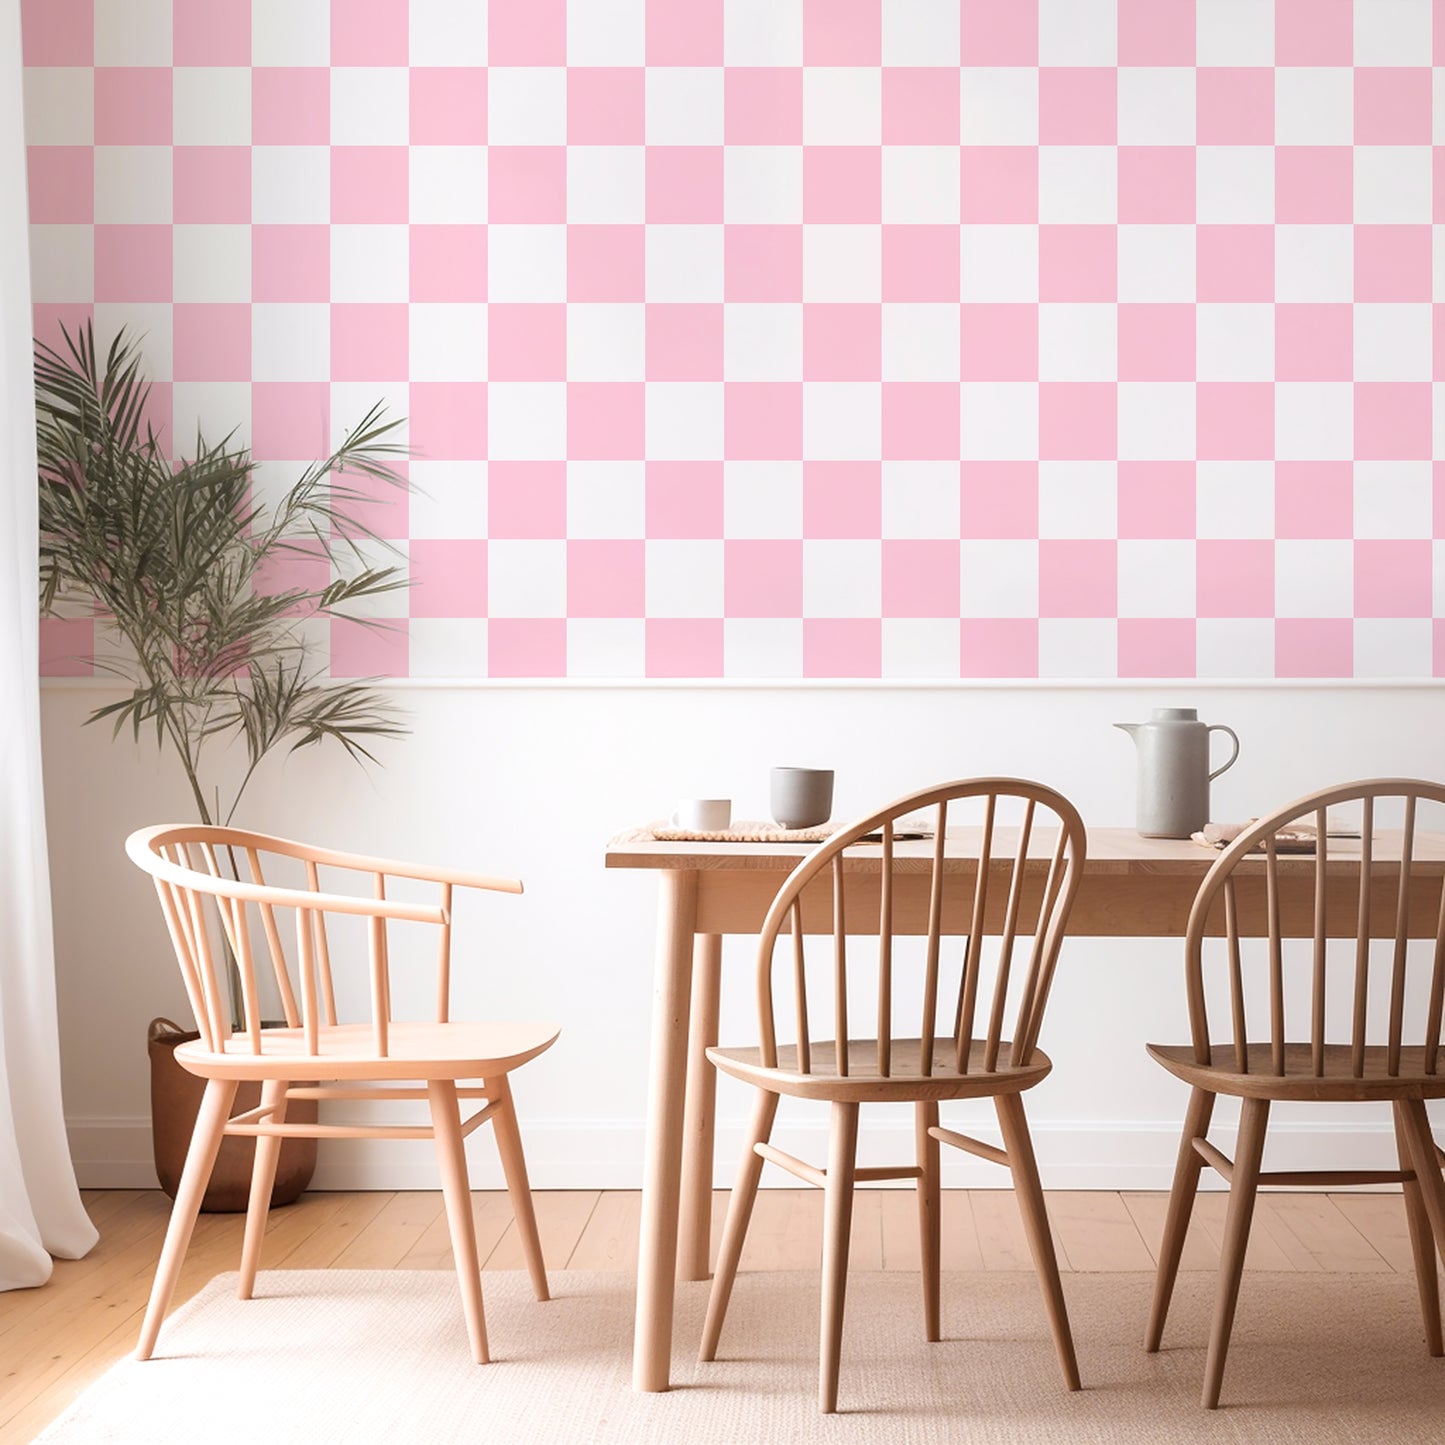 pink and white checkered wallpaper for kitchen walls or bedroom